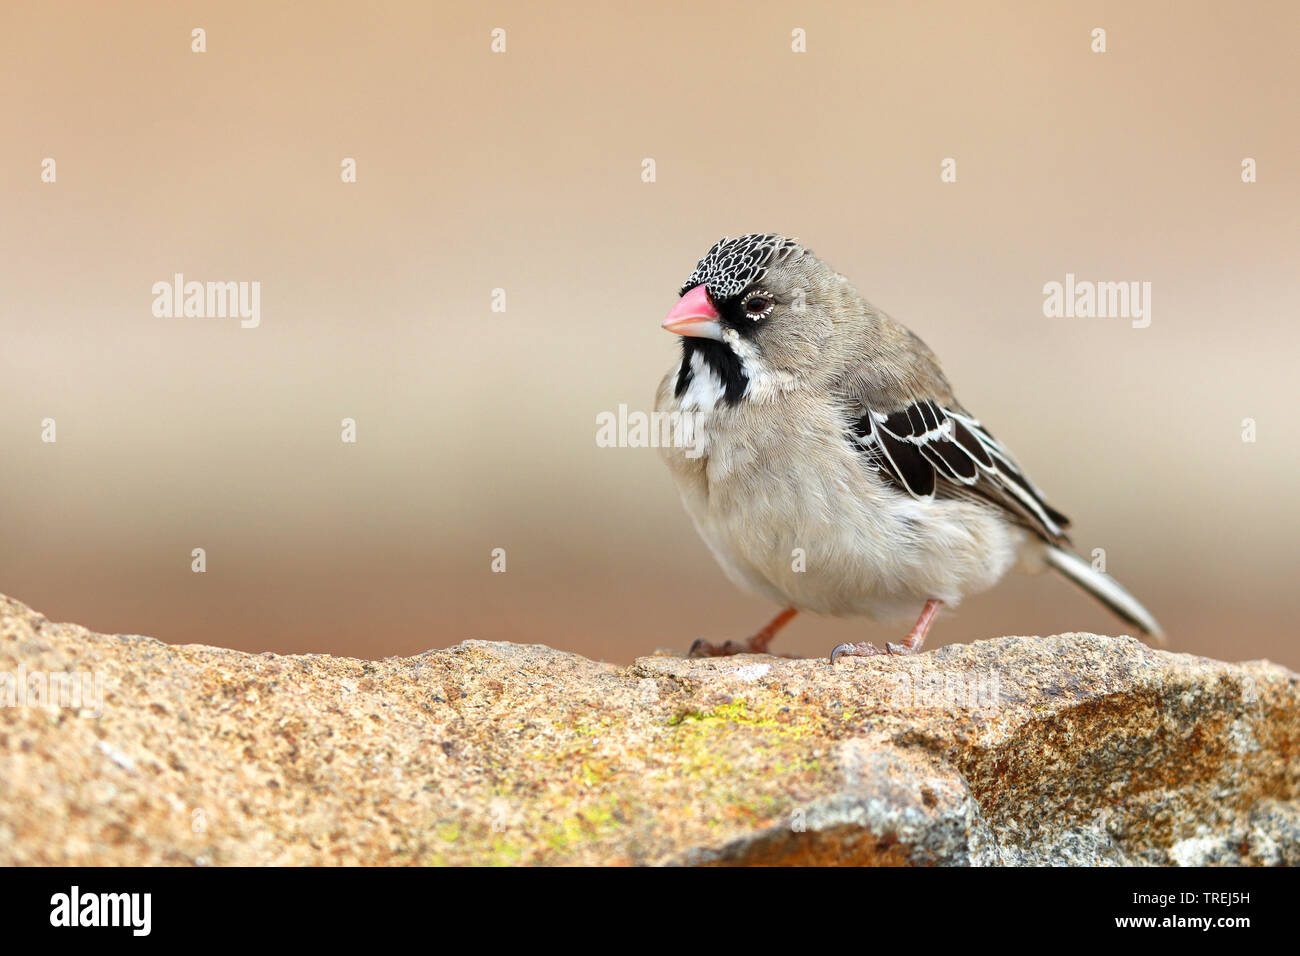 Scaly-feathered Weaver, Scaly-feathered Finch (Sporopipes squamifrons), sits on a stone, South Africa, Eastern Cape, Mountain Zebra National Park Stock Photo